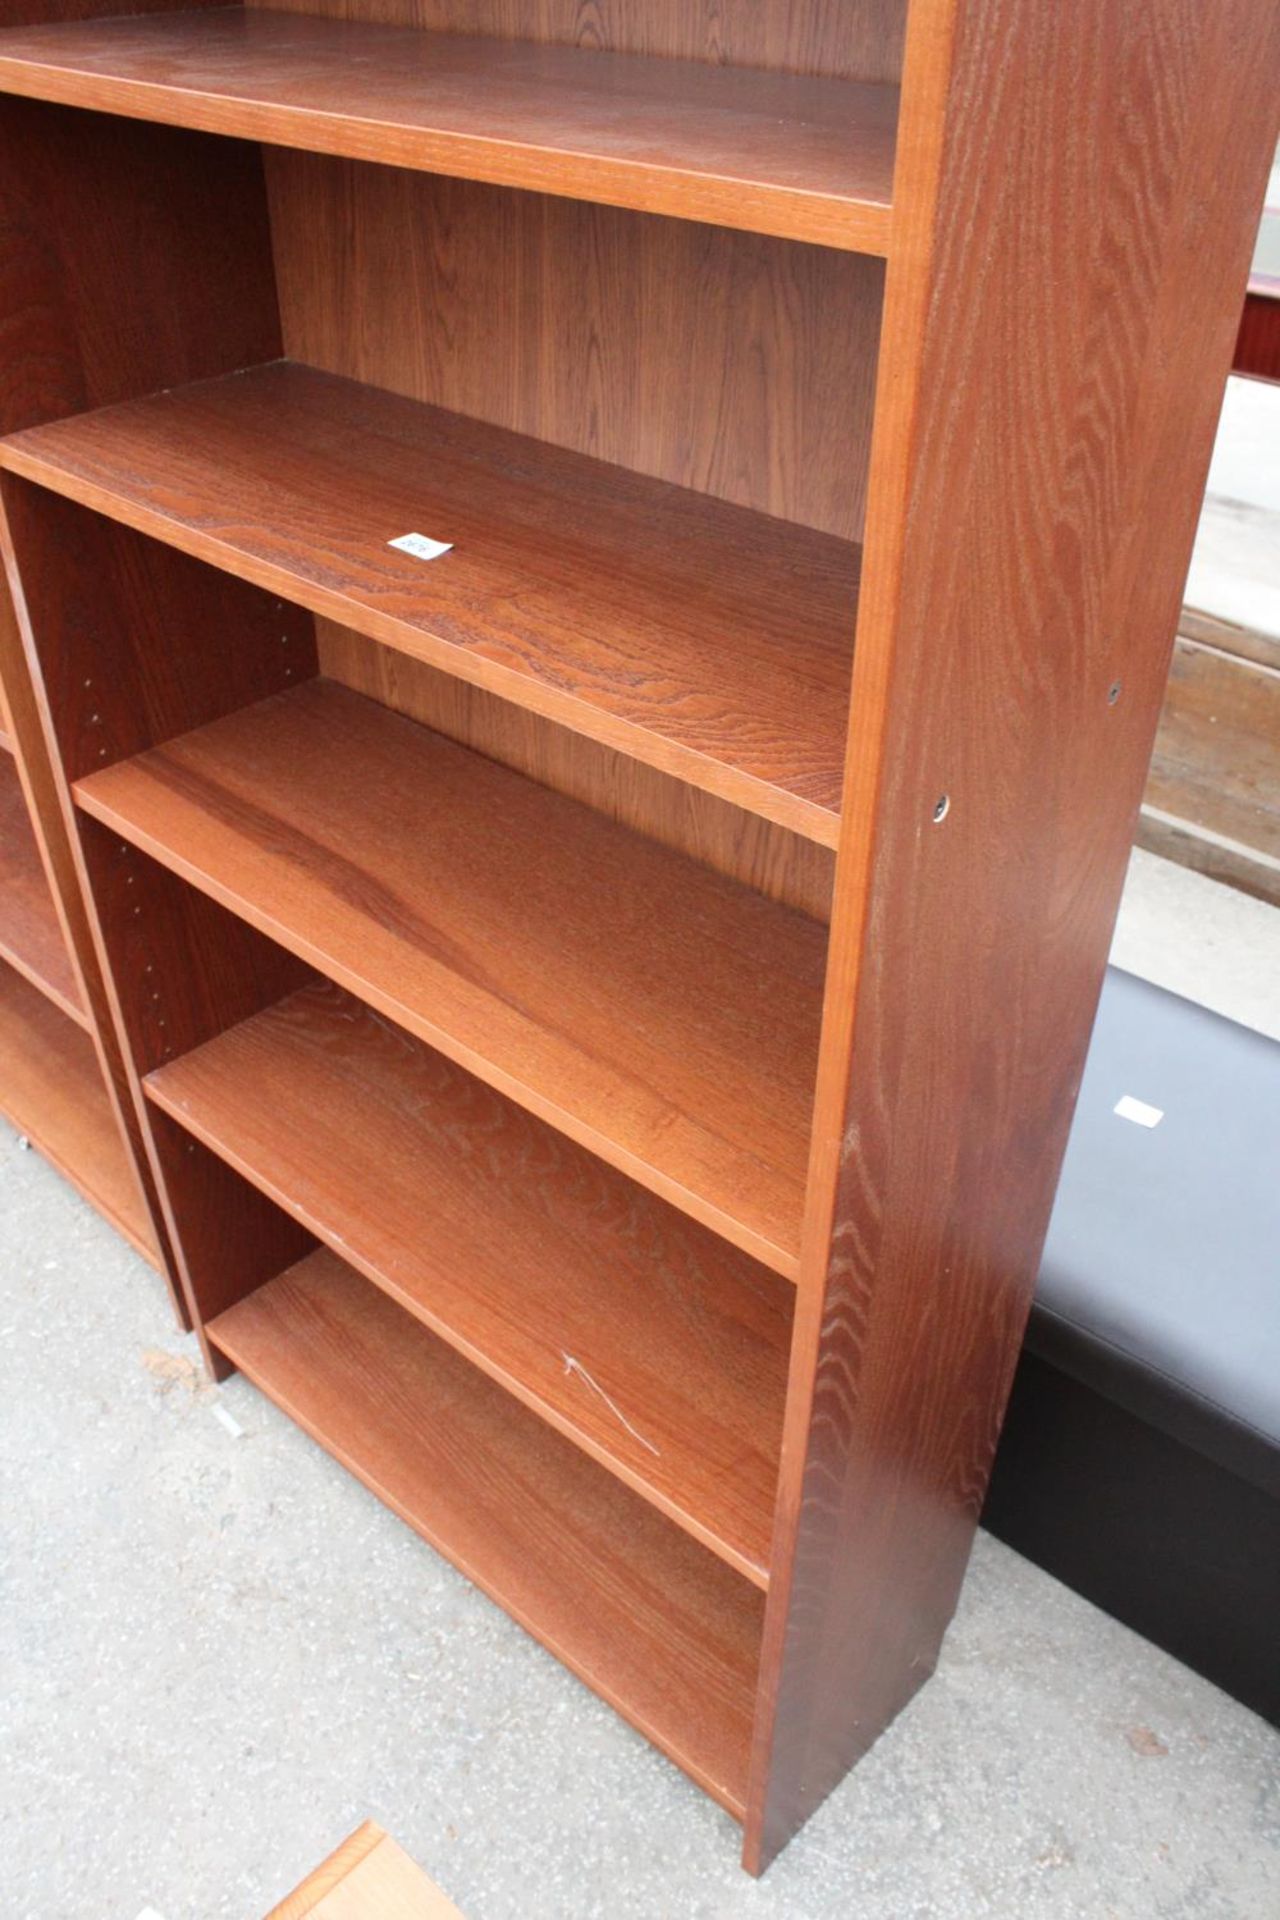 A MODERN SEVEN TIER OPEN BOOKCASE, 32" WIDE - Image 3 of 3